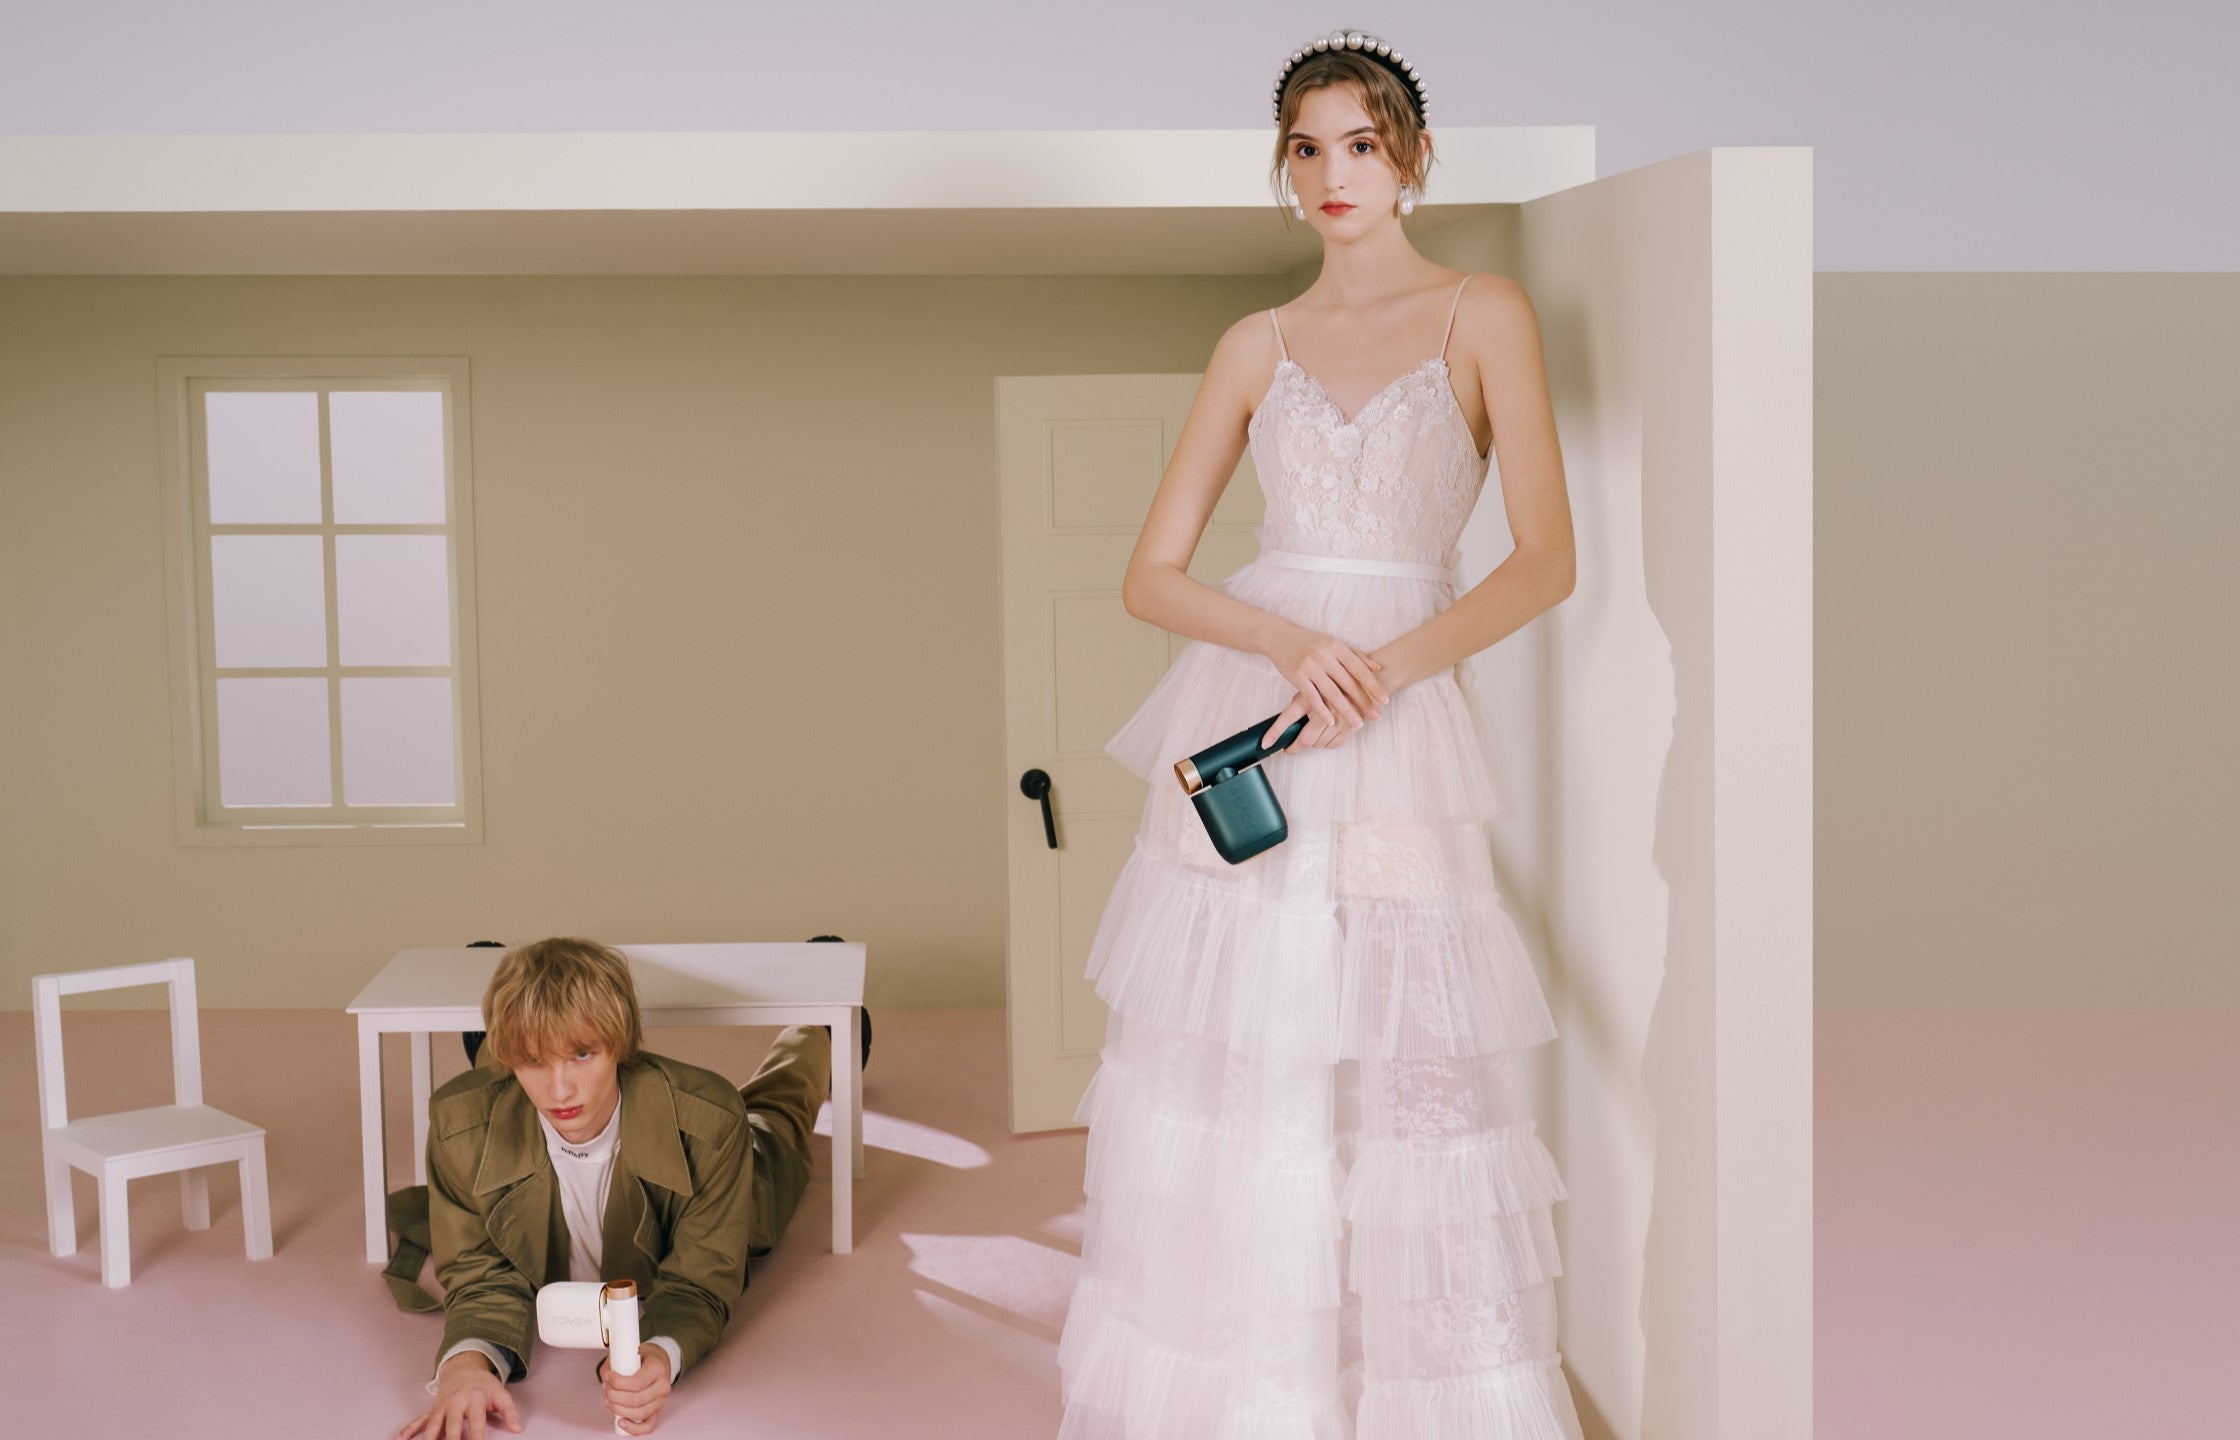 Fashion shoot depicting a model in a tiered wedding gown standing next to a man under a table, both showcasing at home IPL hair removal gadgets.